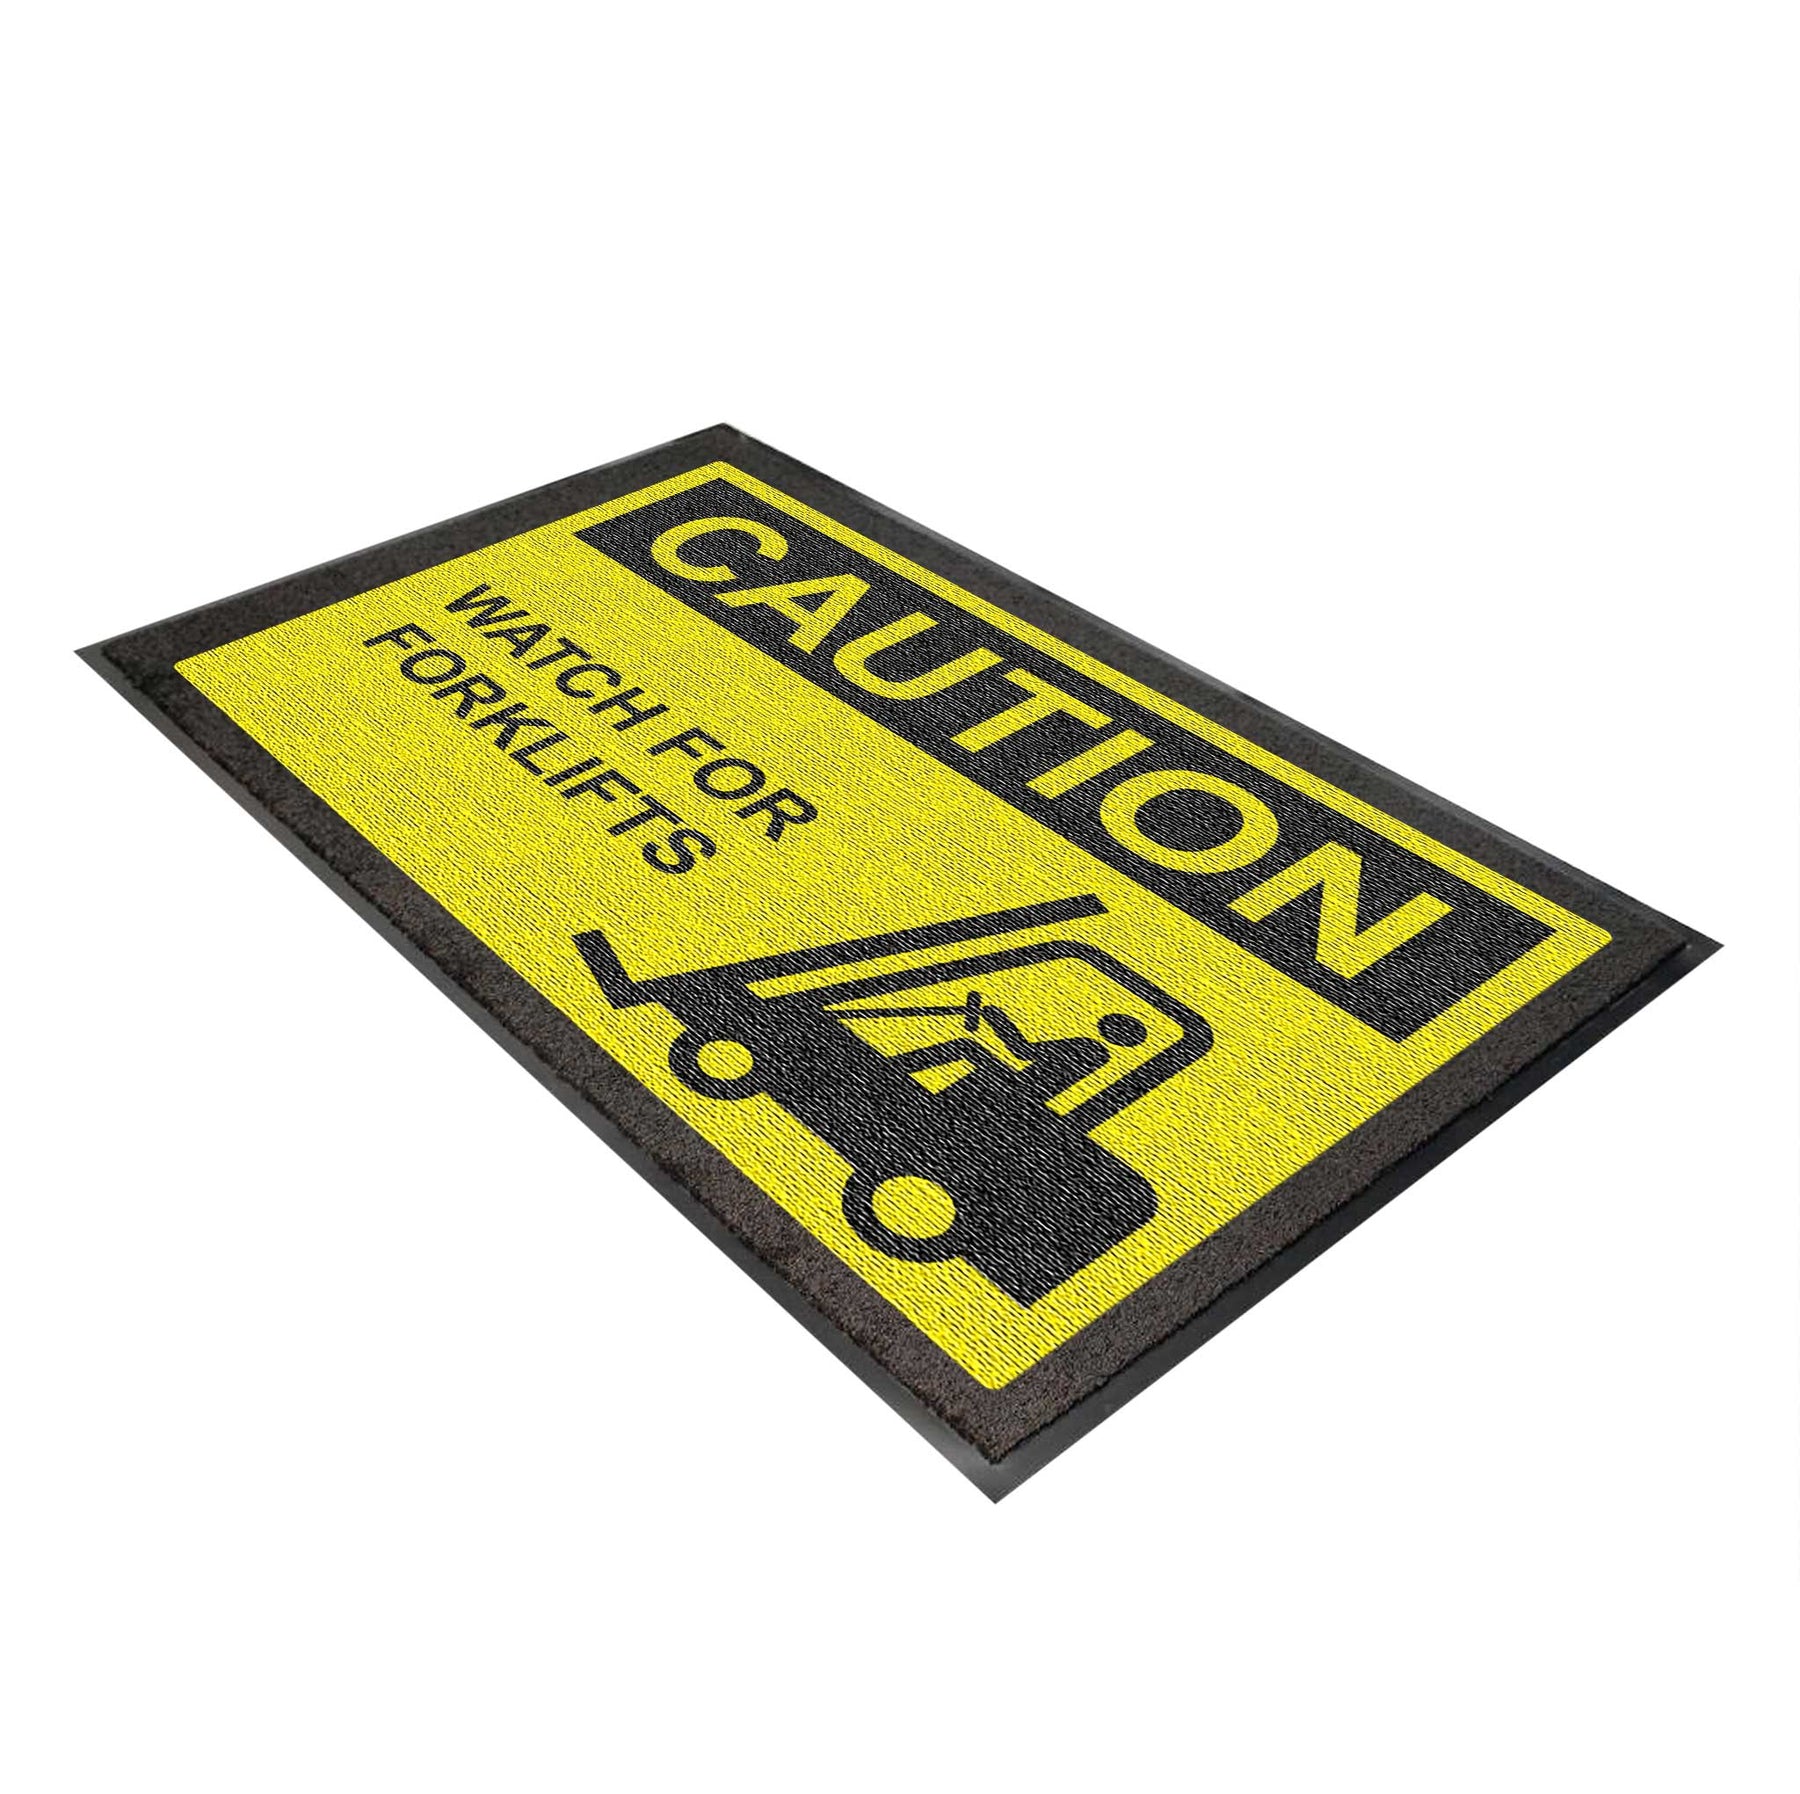 Caution Forklifts Safety Mat 850mm x 1200mm